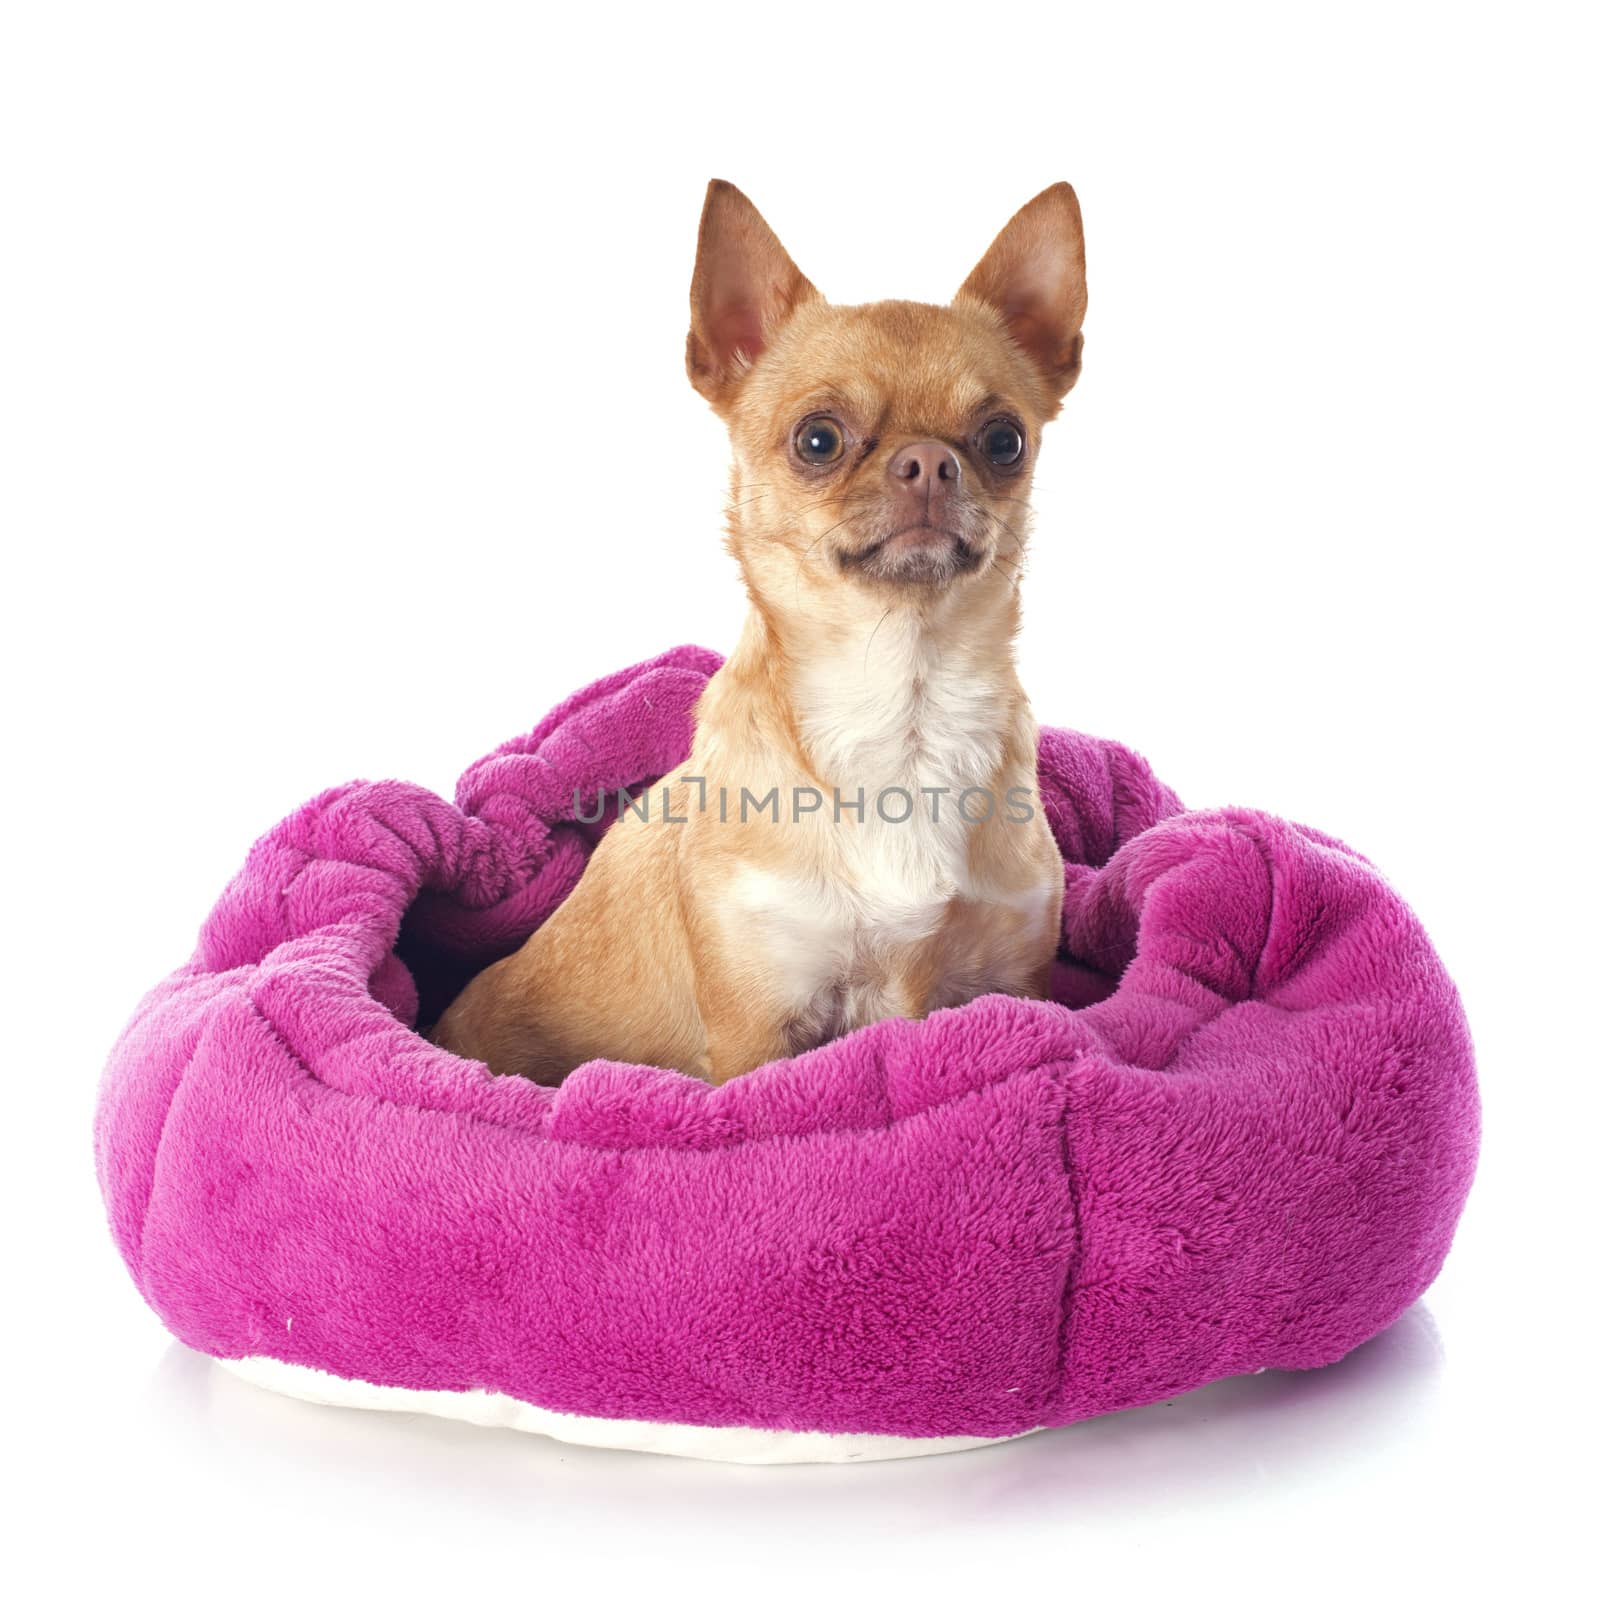 chihuahua in dog bed in front of white background